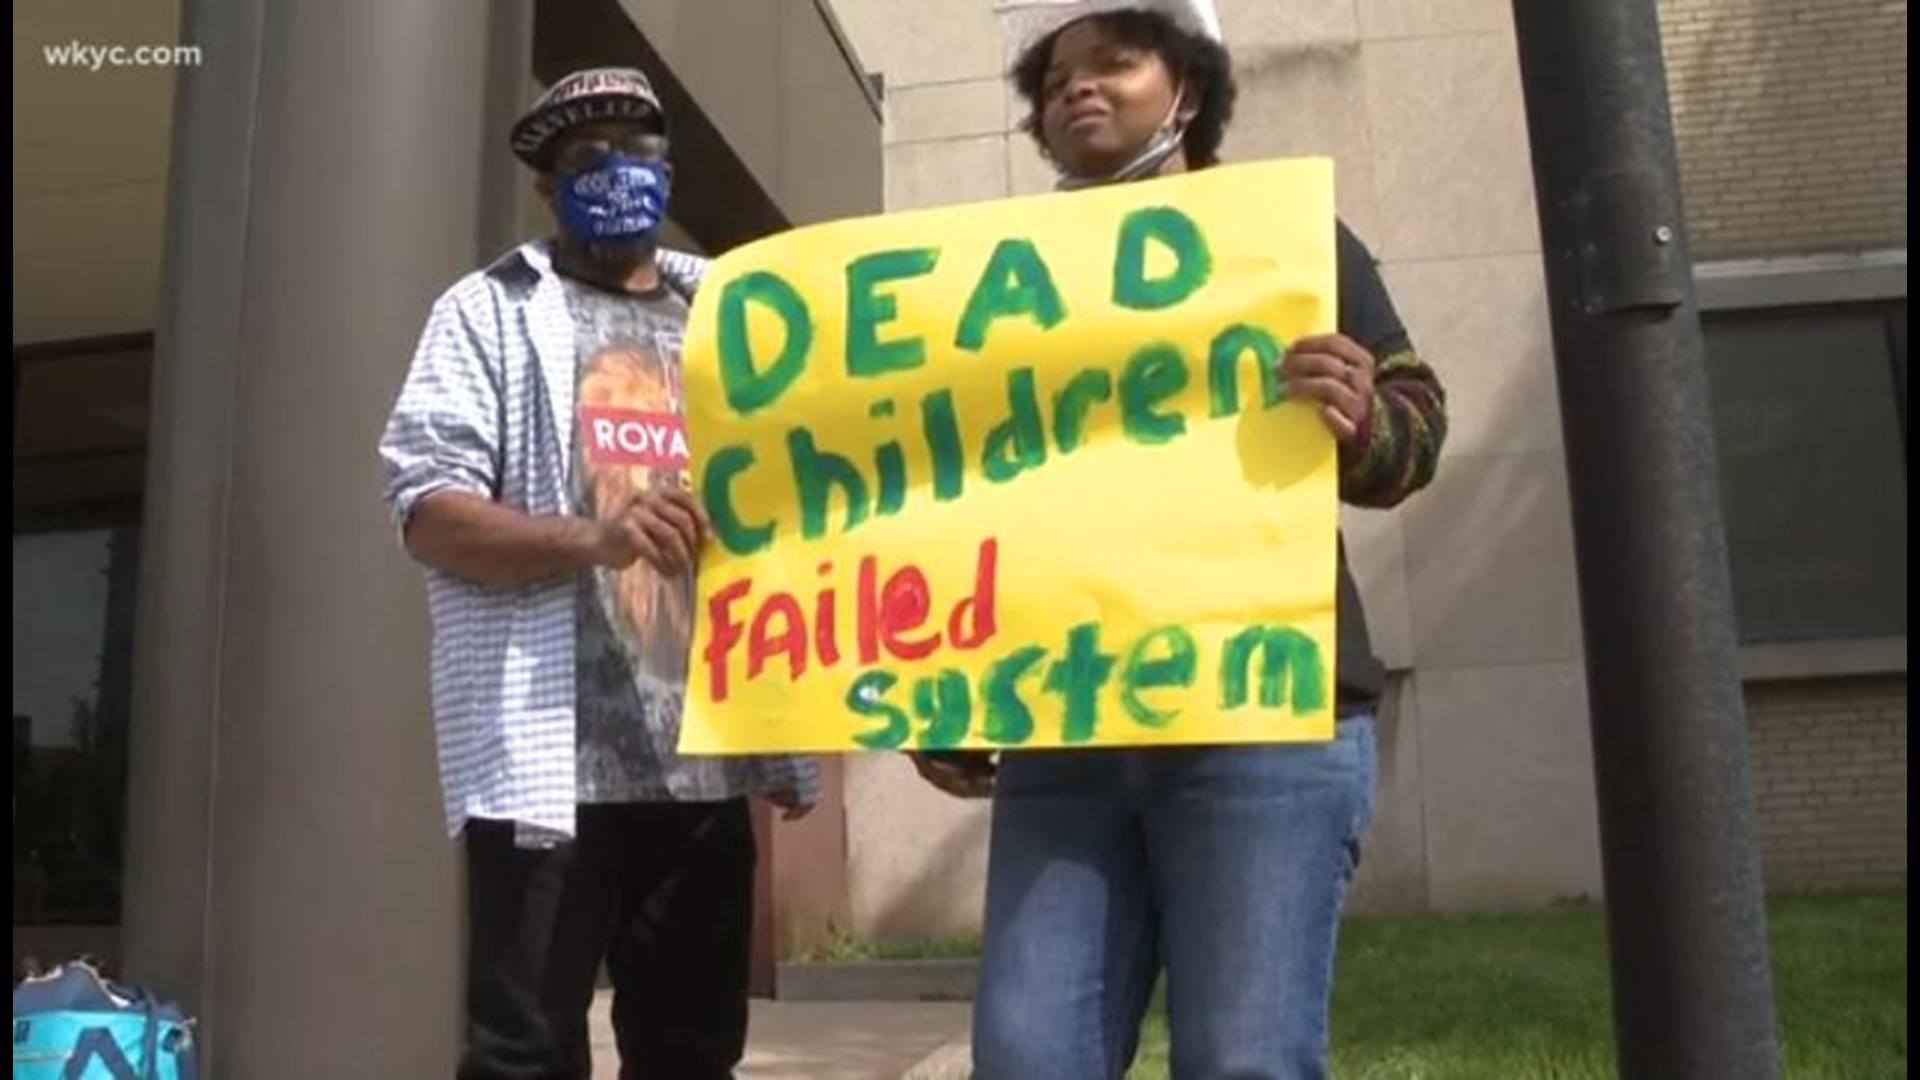 May 6, 2021: A small group of demonstrators spoke out in Cleveland morning while saying the Department of Children and Family Services have 'miserably failed.'